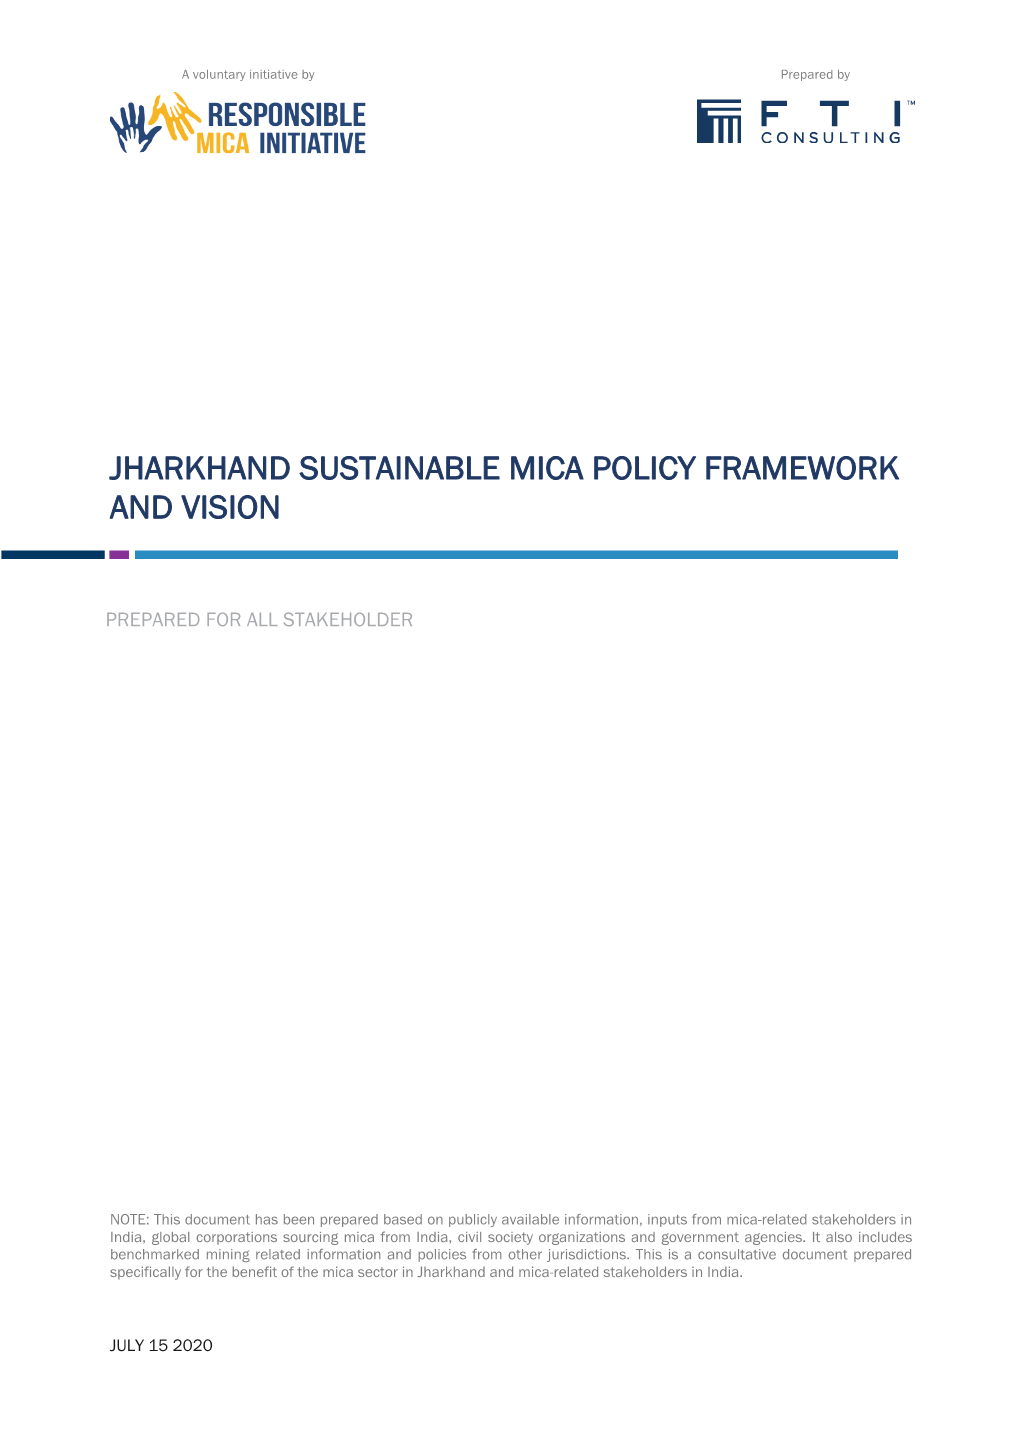 Jharkhand Sustainable Mica Policy Framework and Vision